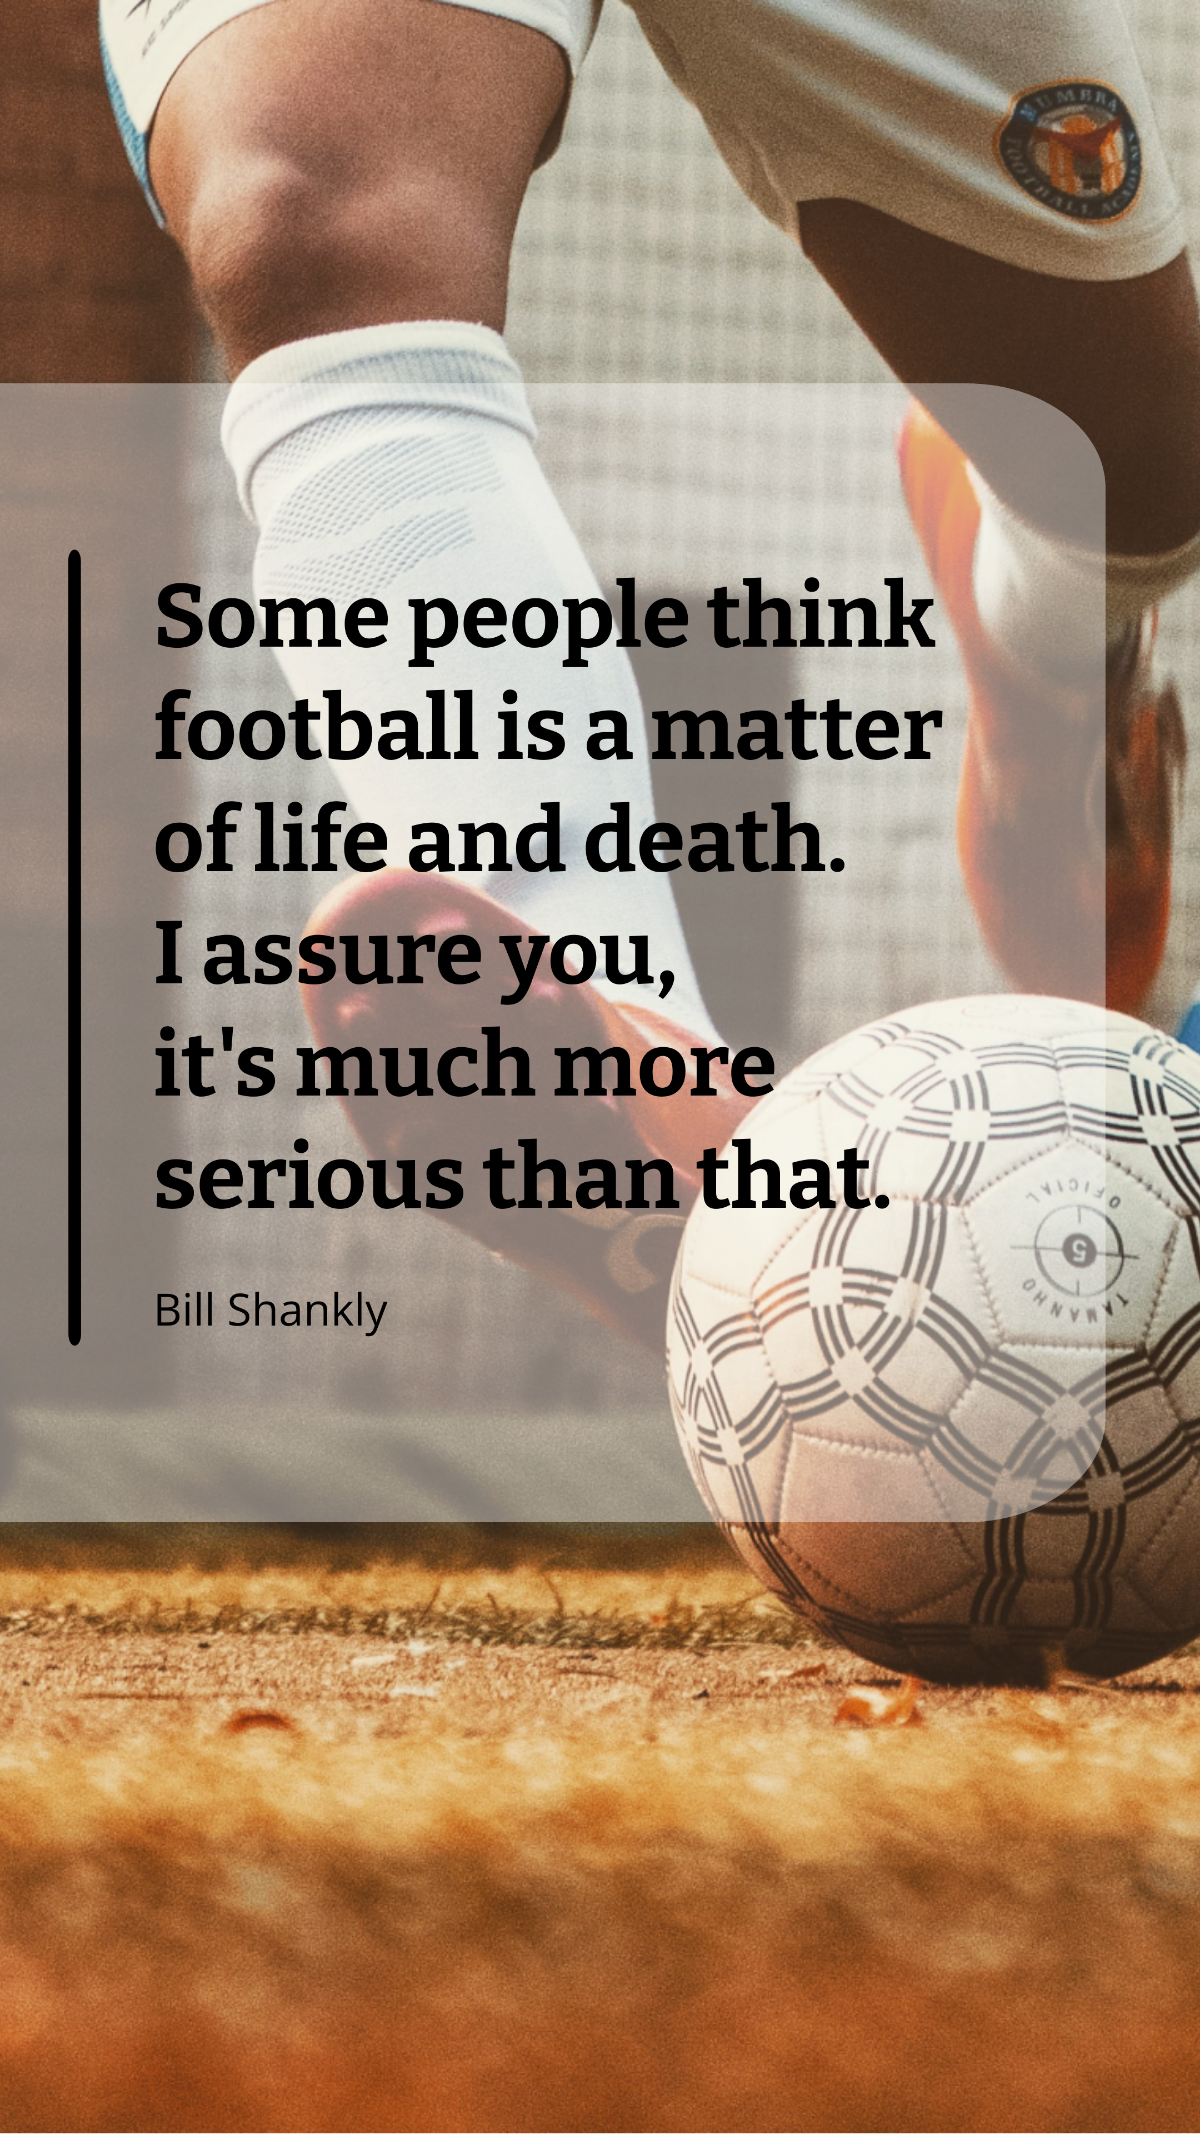 Bill Shankly - Some people think football is a matter of life and death. I assure you, it's much more serious than that. Template